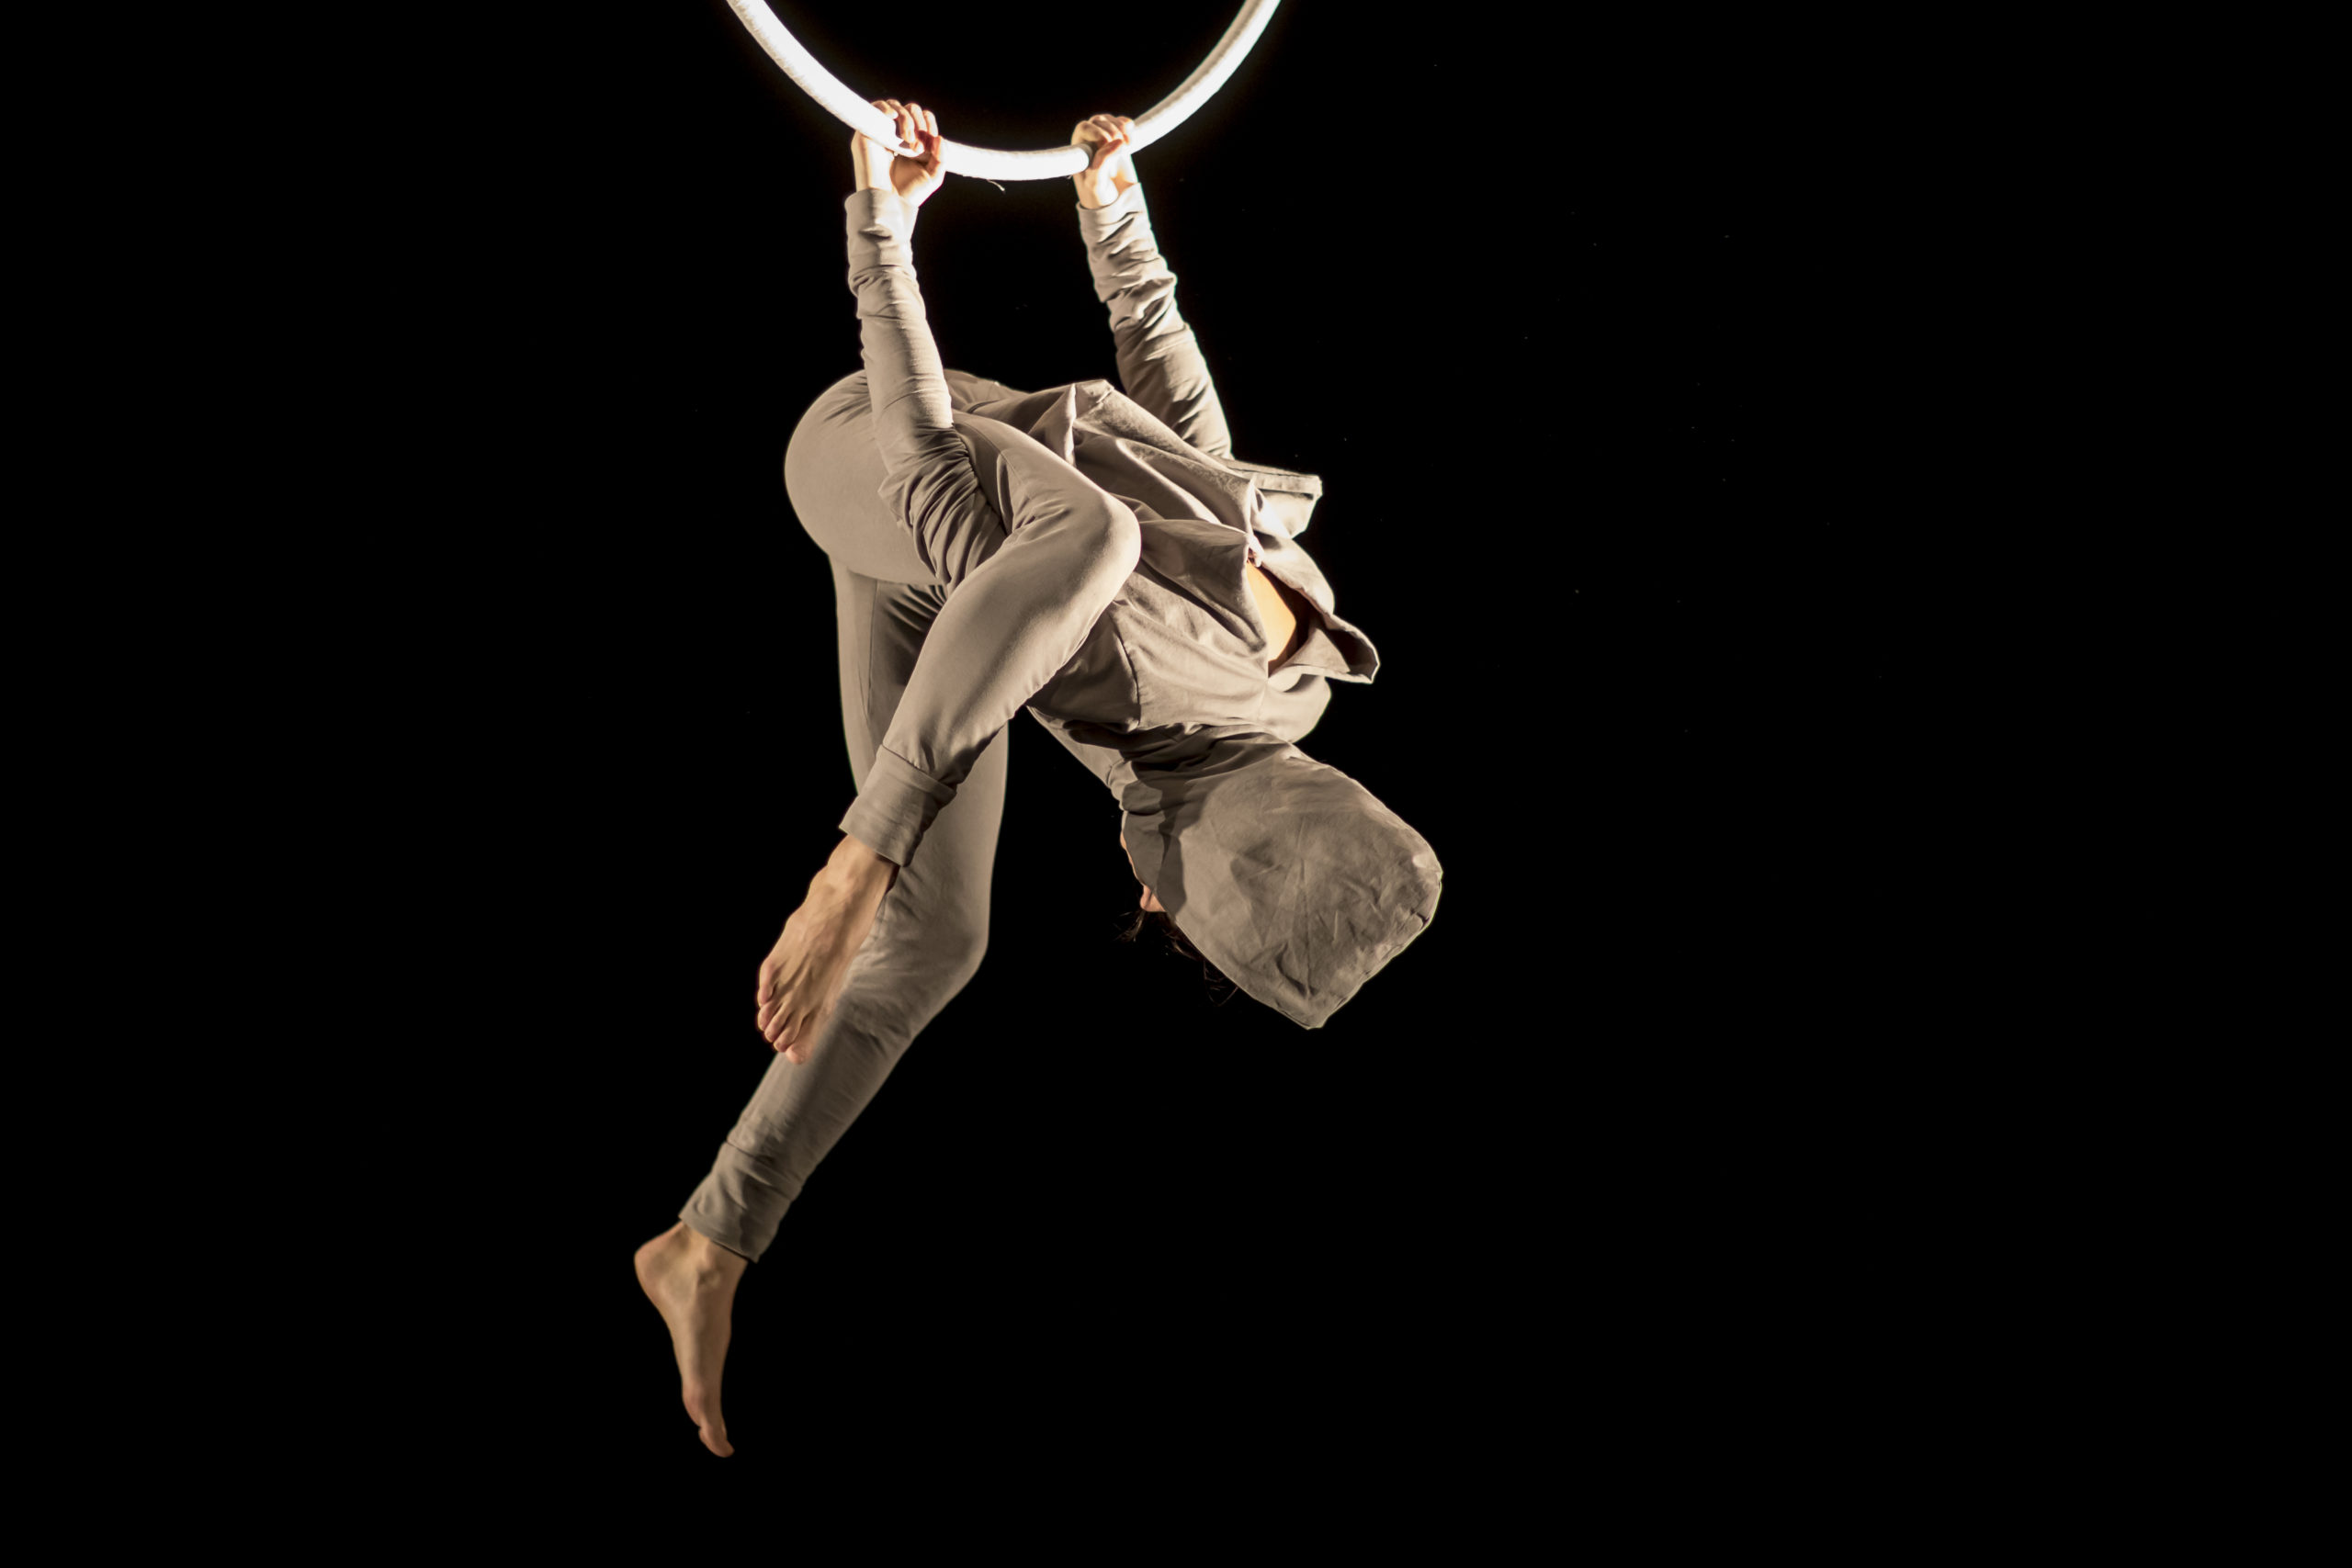 Czech aerialist Klára Hajdinová hangs from a ring. Her face is covered.